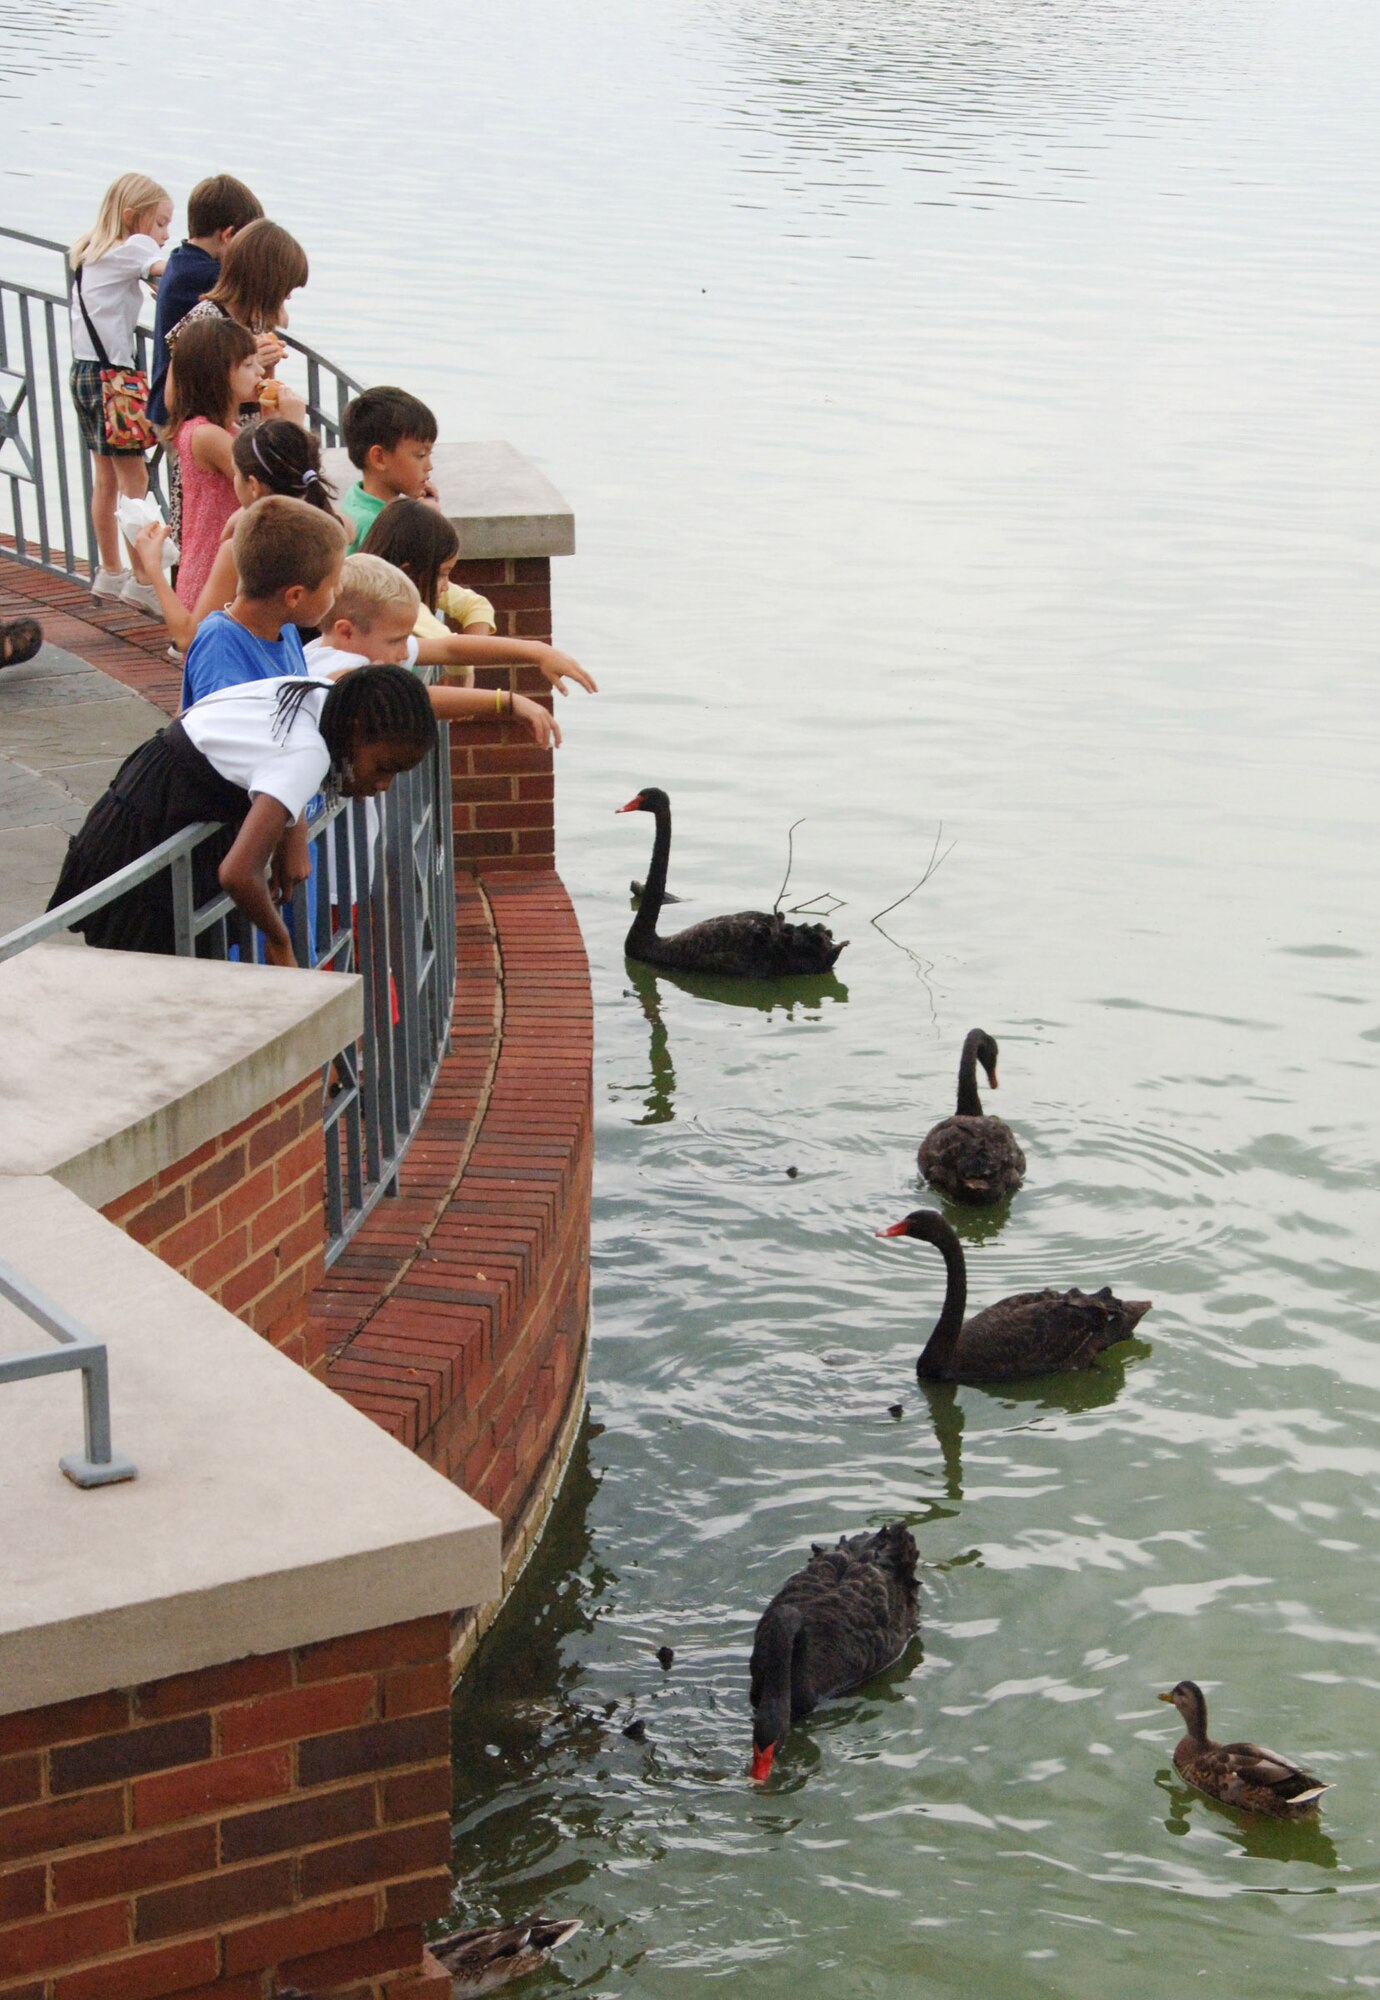 Swans and ducks in the lake around the Montgomery Museum of Fine Arts approach curious onlookers Aug. 20 at the Military Appreciation Night. (U.S. Air Force photo/Melanie Rodgers Cox)